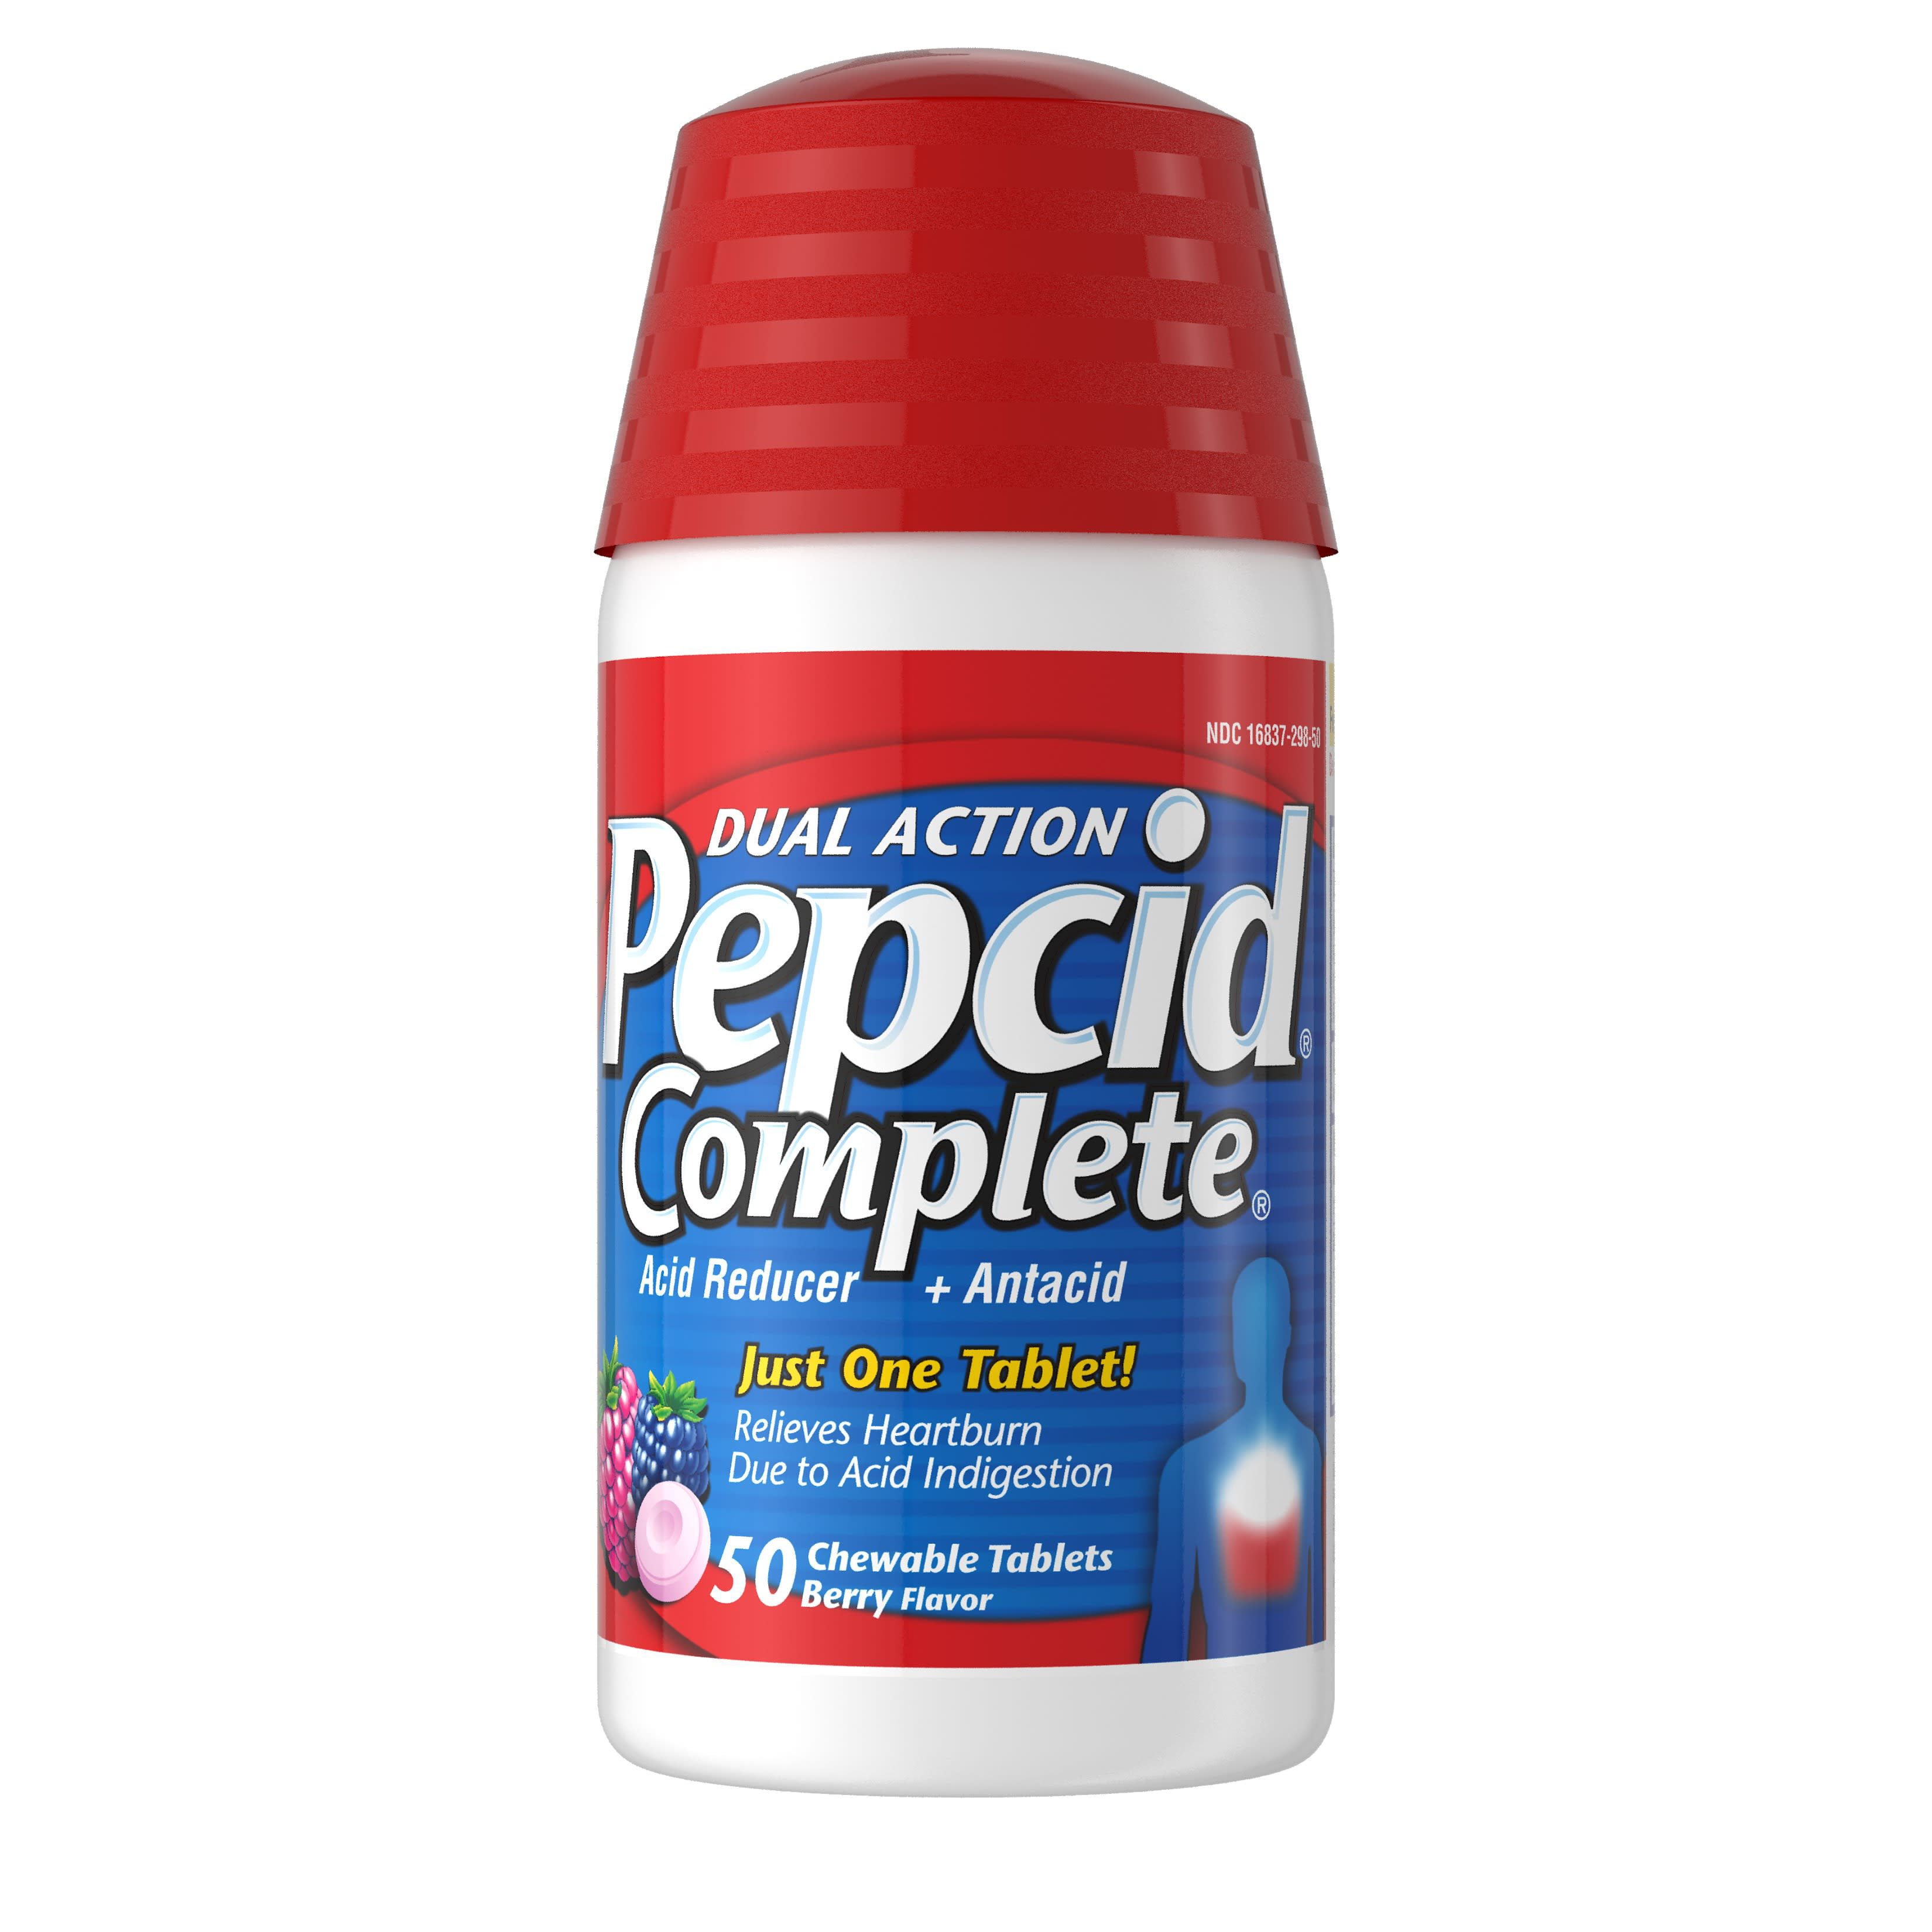 what is pepcid complete good for